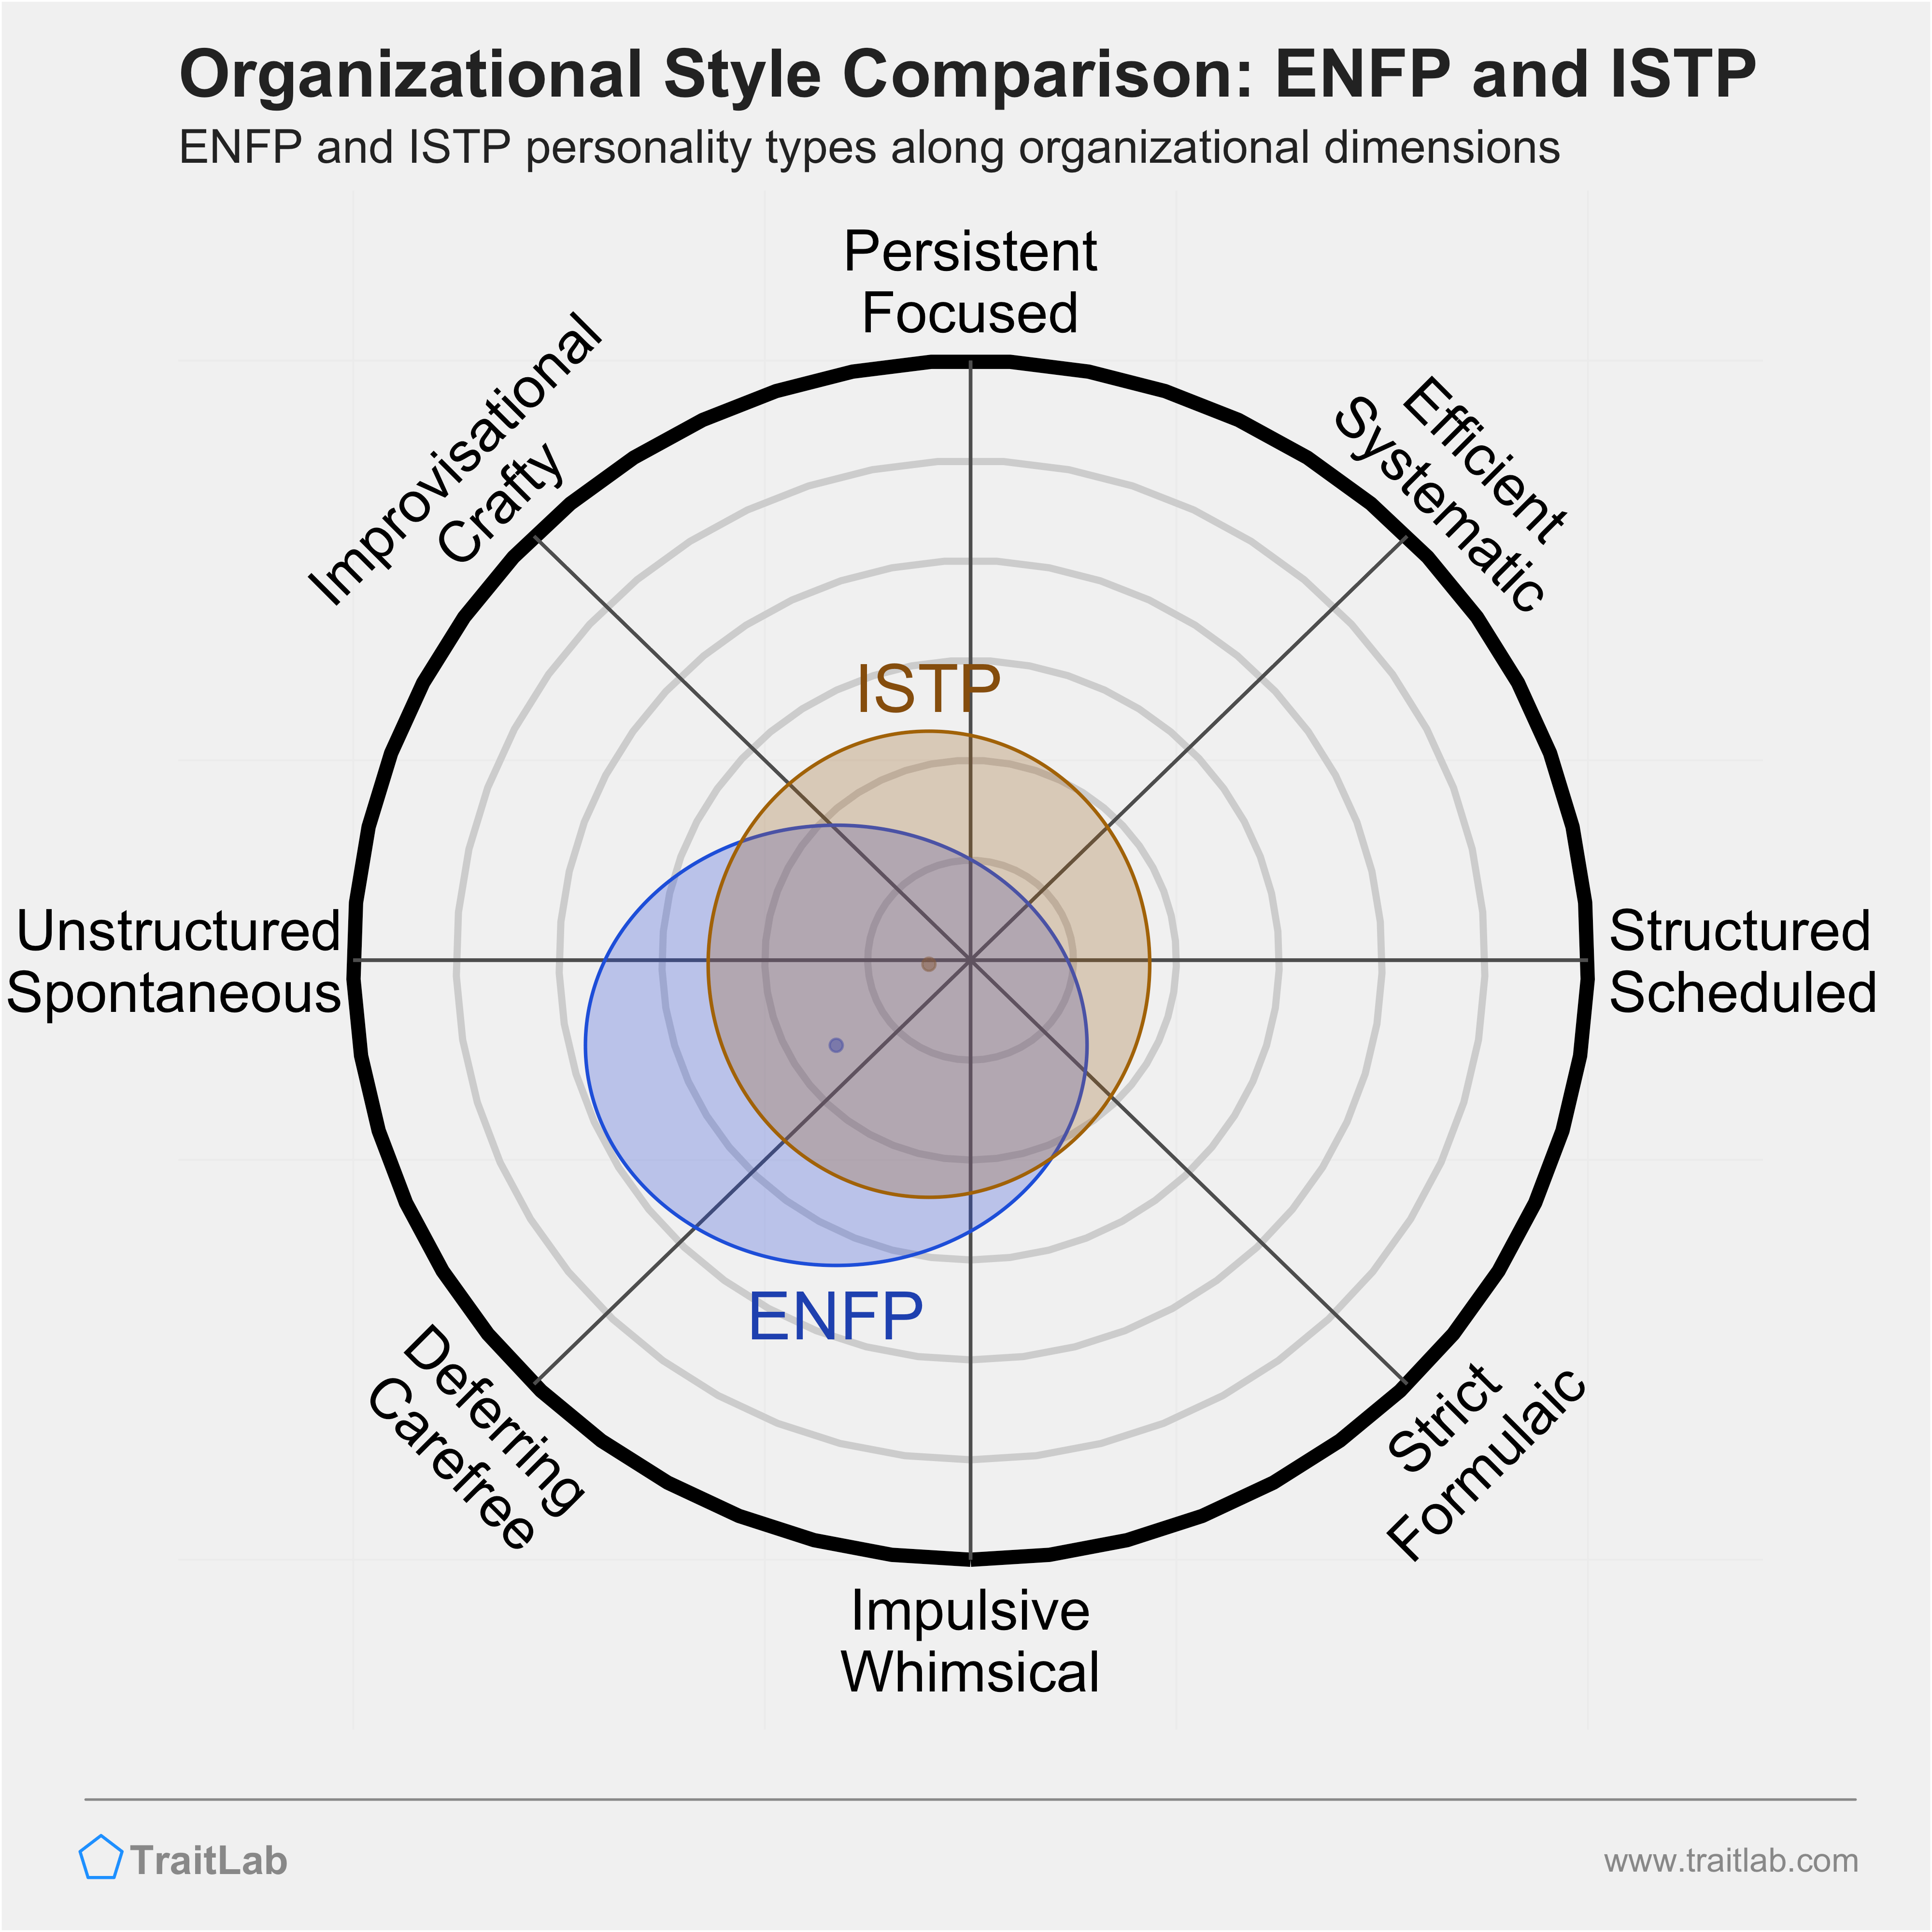 ENFP and ISTP comparison across organizational dimensions